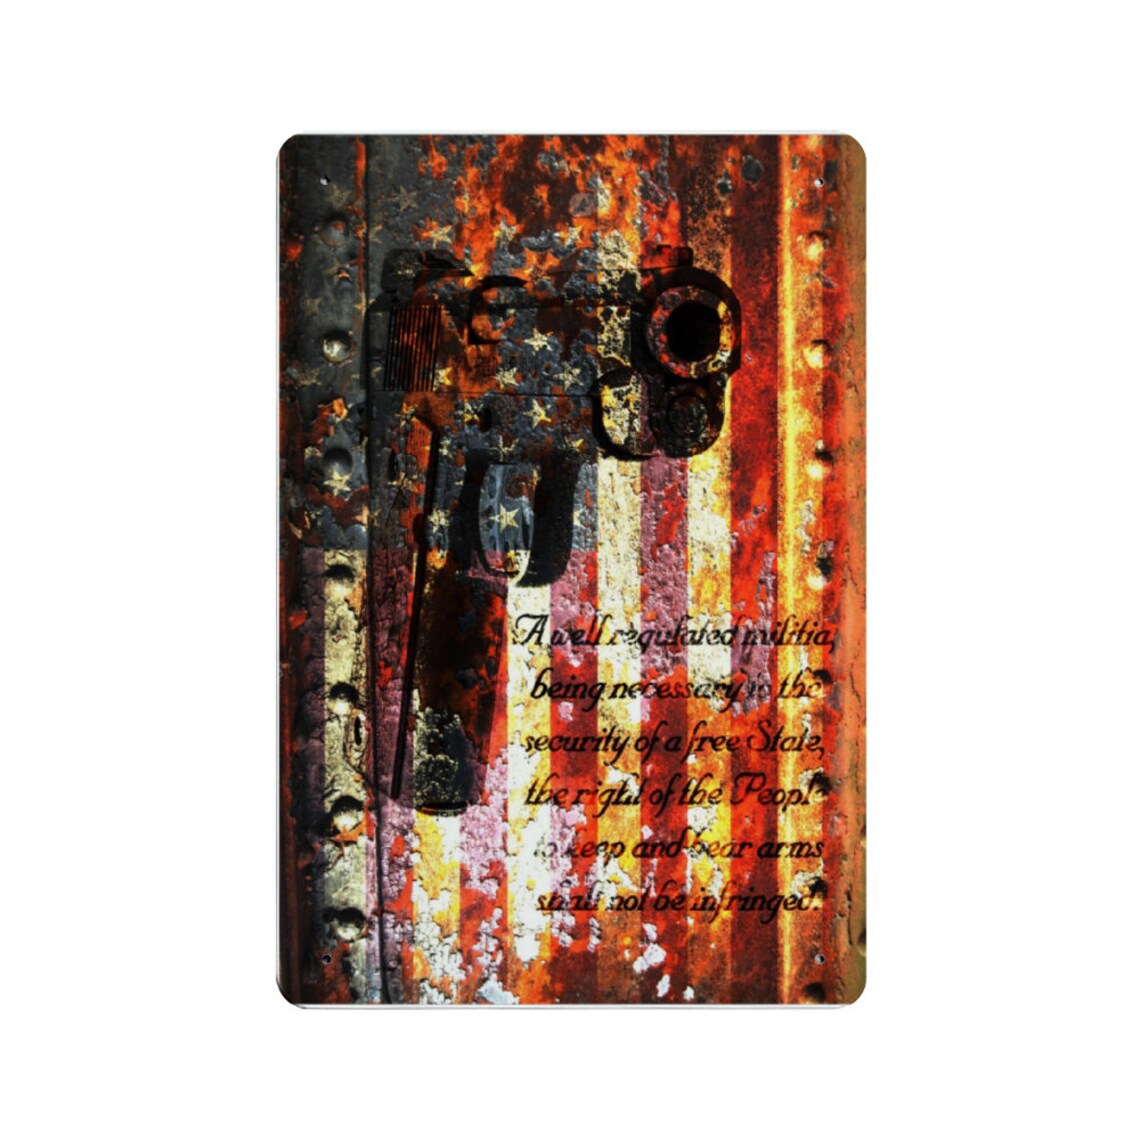 M1911 Pistol and 2nd Amendment on Rusted American Flag Print on Metal